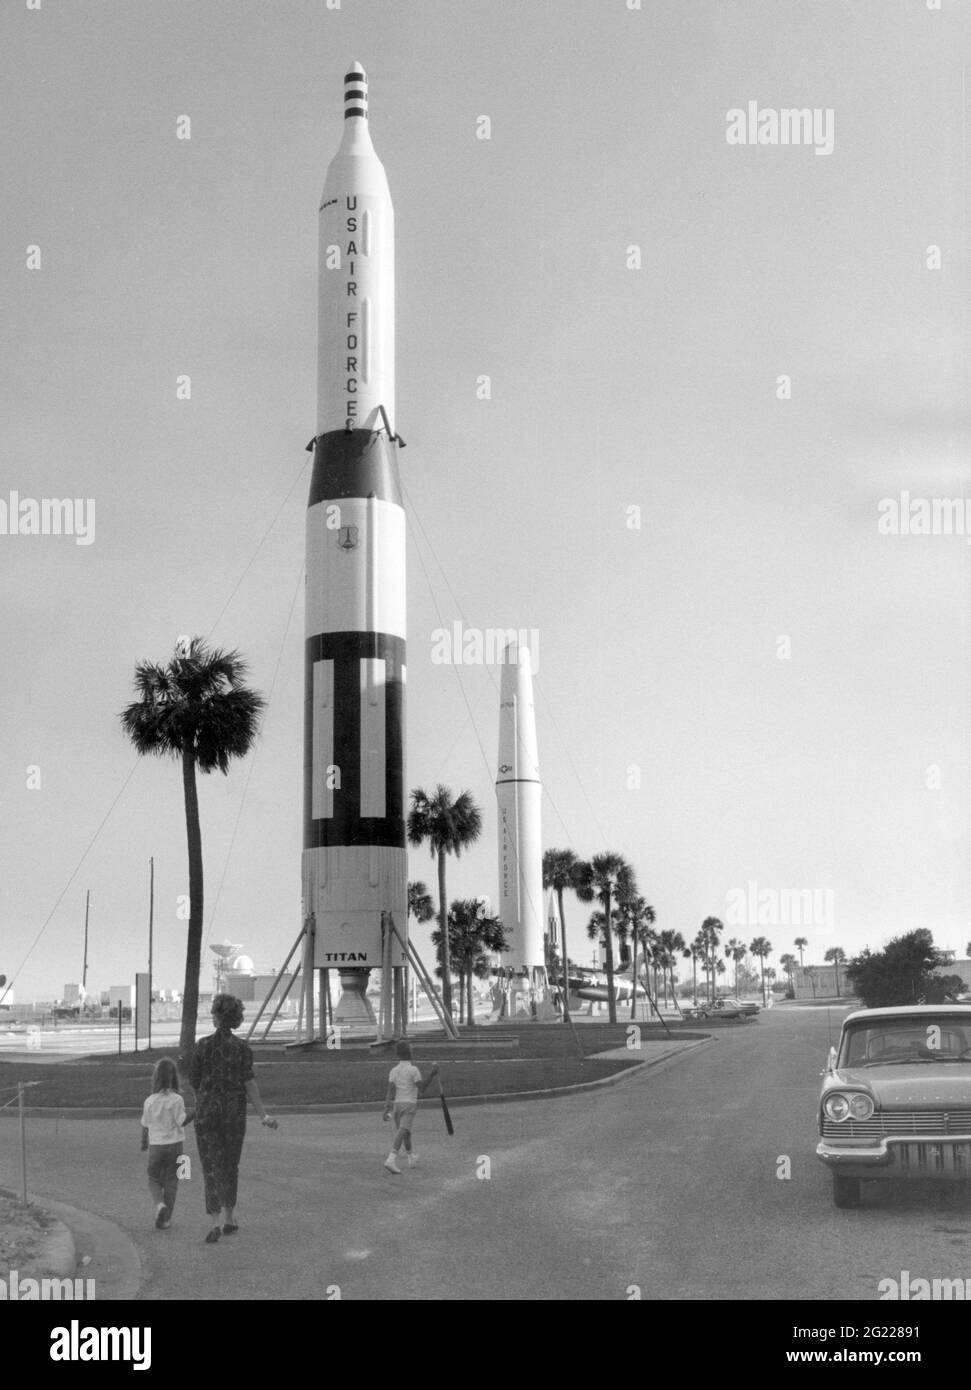 astronautics, rockets, rockets and planes exhibited beside a road in Cape Canaveral, Florida, USA, ADDITIONAL-RIGHTS-CLEARANCE-INFO-NOT-AVAILABLE Stock Photo